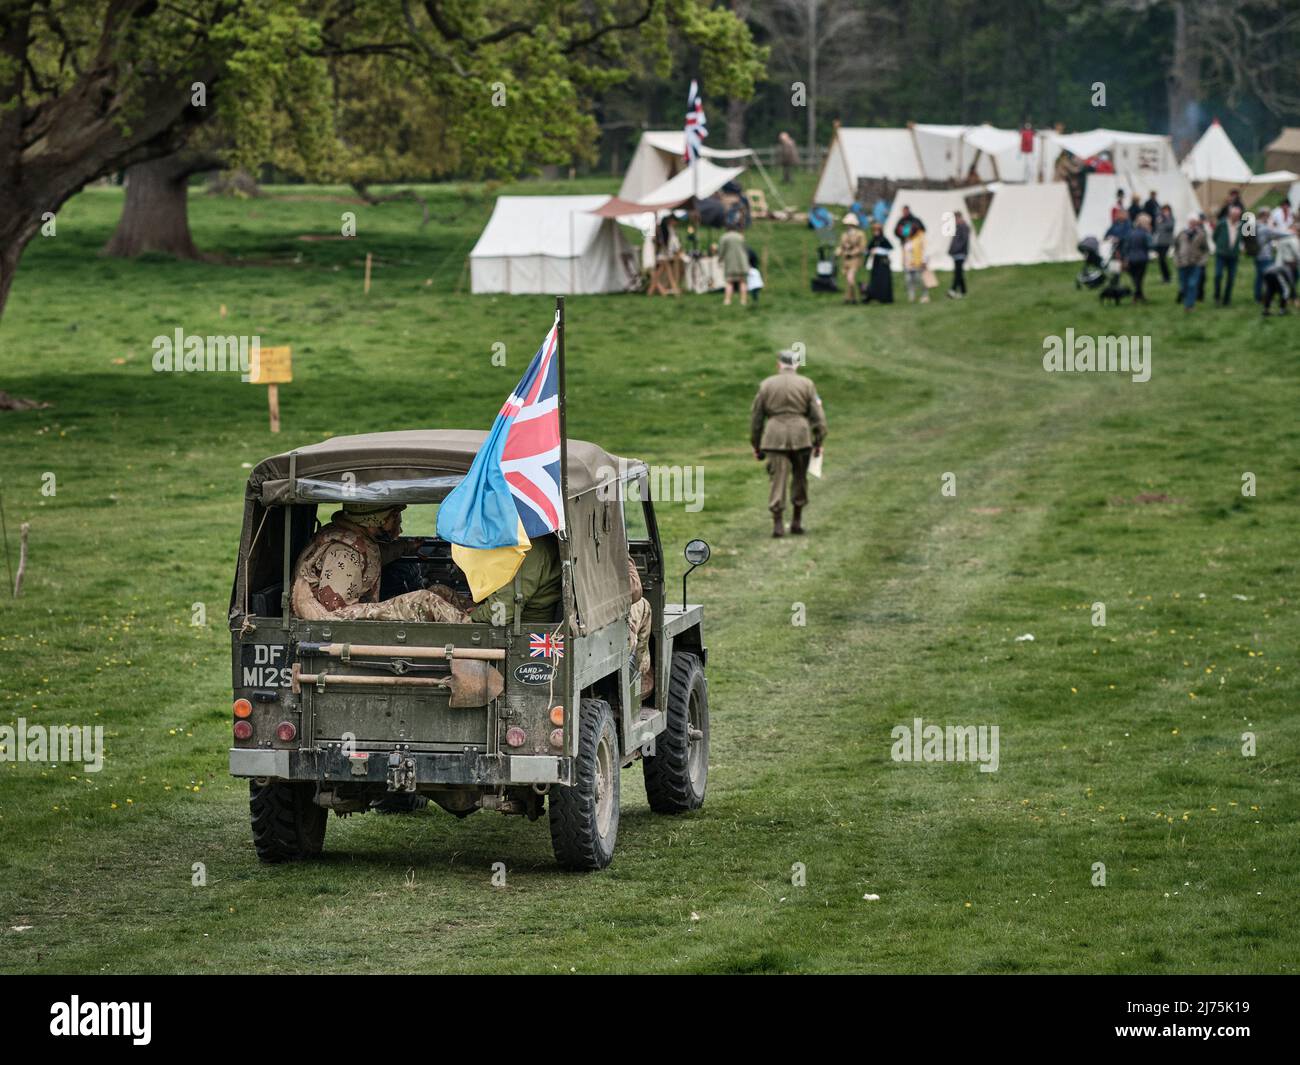 A vintage military Land Rover gives some soldiers a lift at the No Man's Land Event at Bodrhyddan Hall, Wales Stock Photo